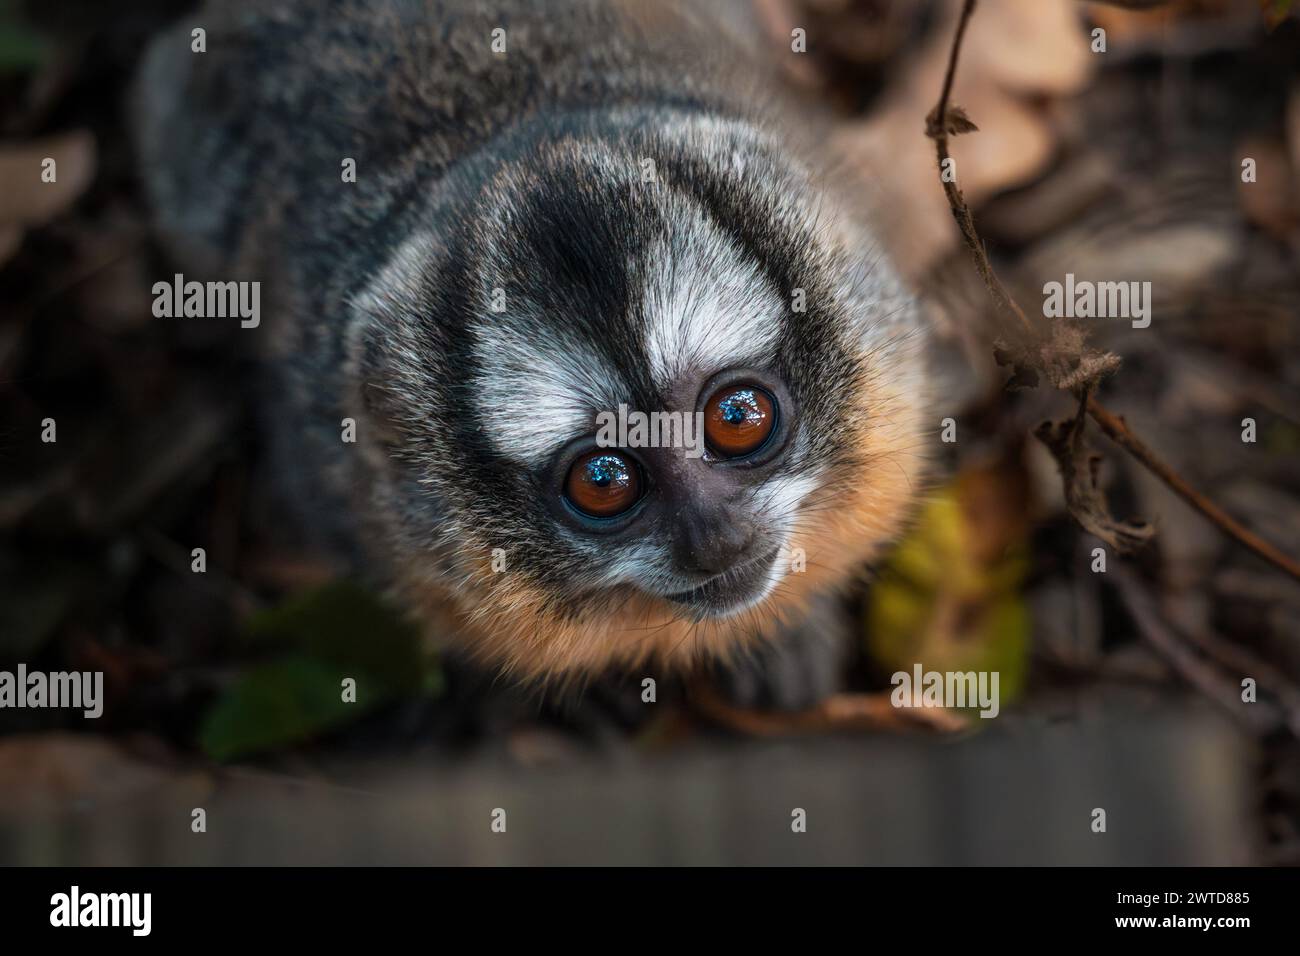 Adorable three-striped night monkey curiously looking up. Friendly inquisitive monkey close-up. Northern owl monkey from South America. Stock Photo